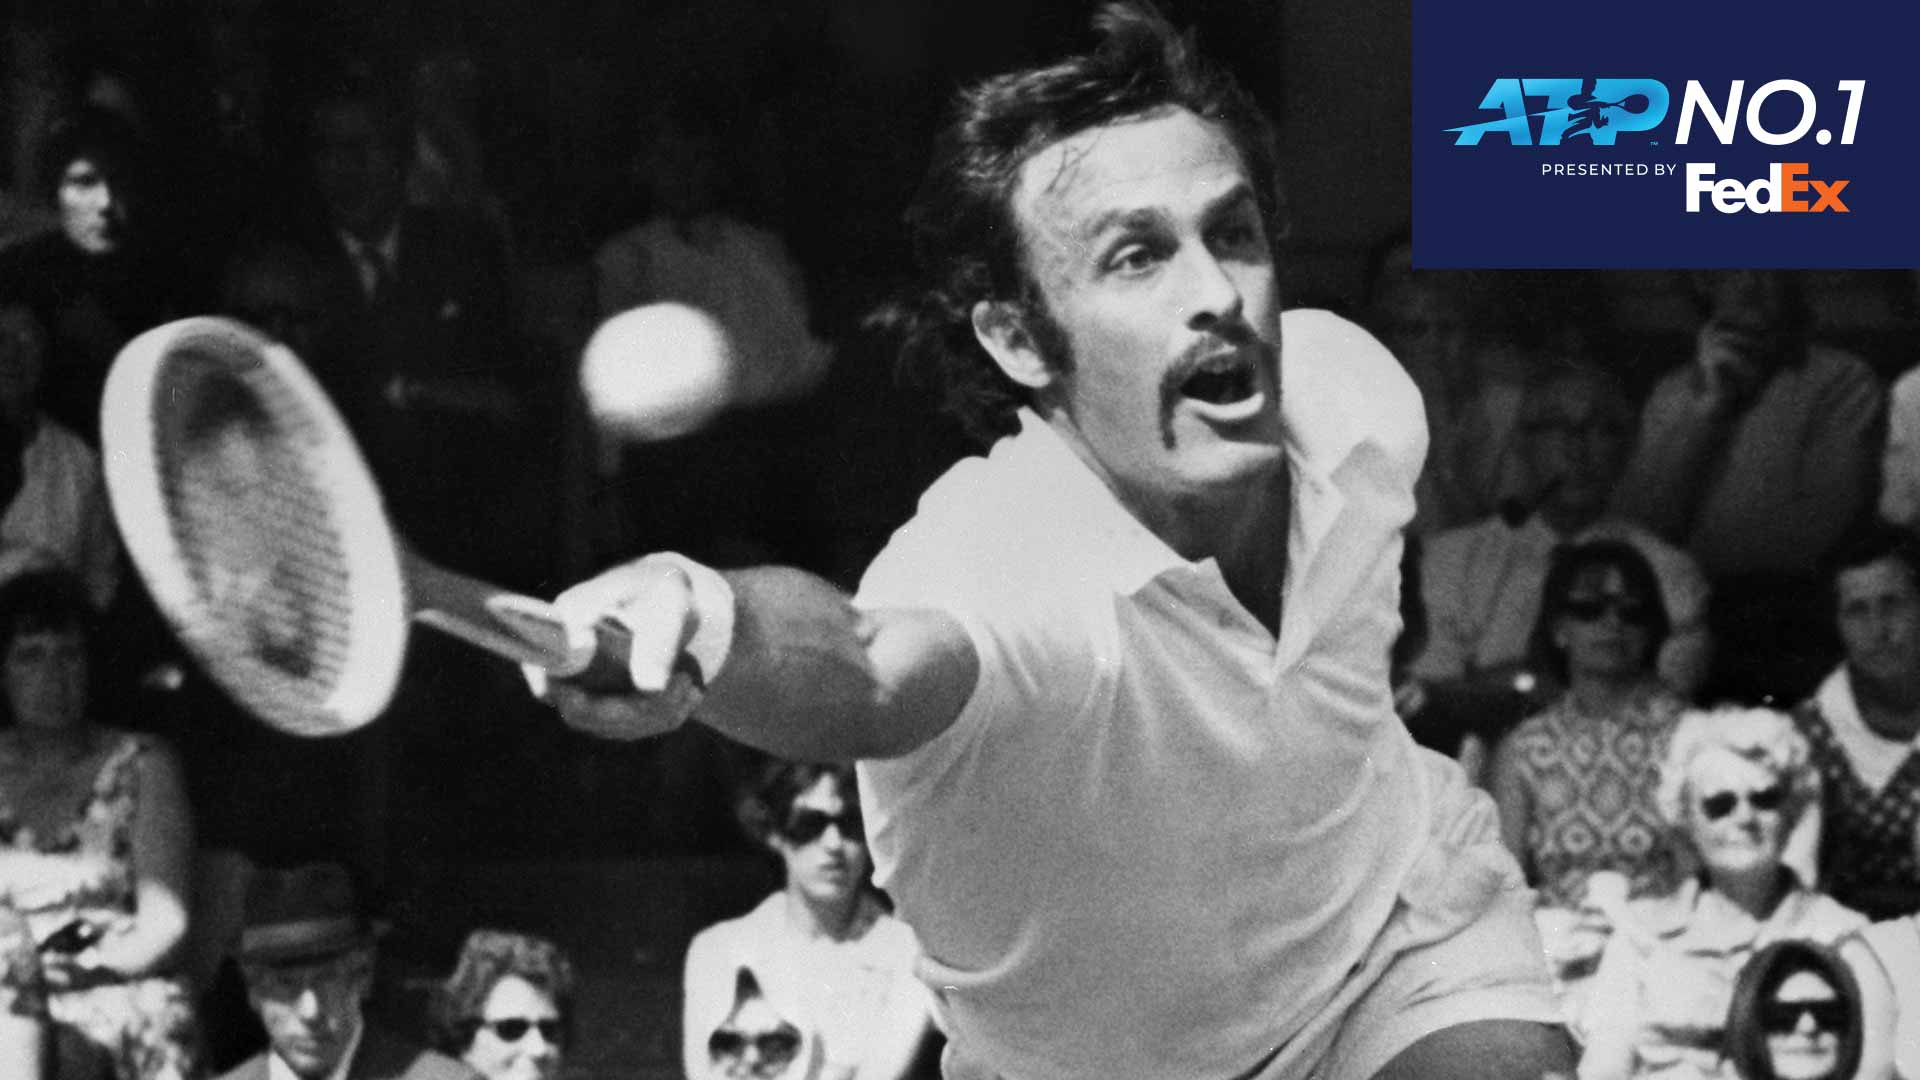 Australia's John Newcombe became the second No. 1 in the FedEx ATP Rankings on 3 June 1974.